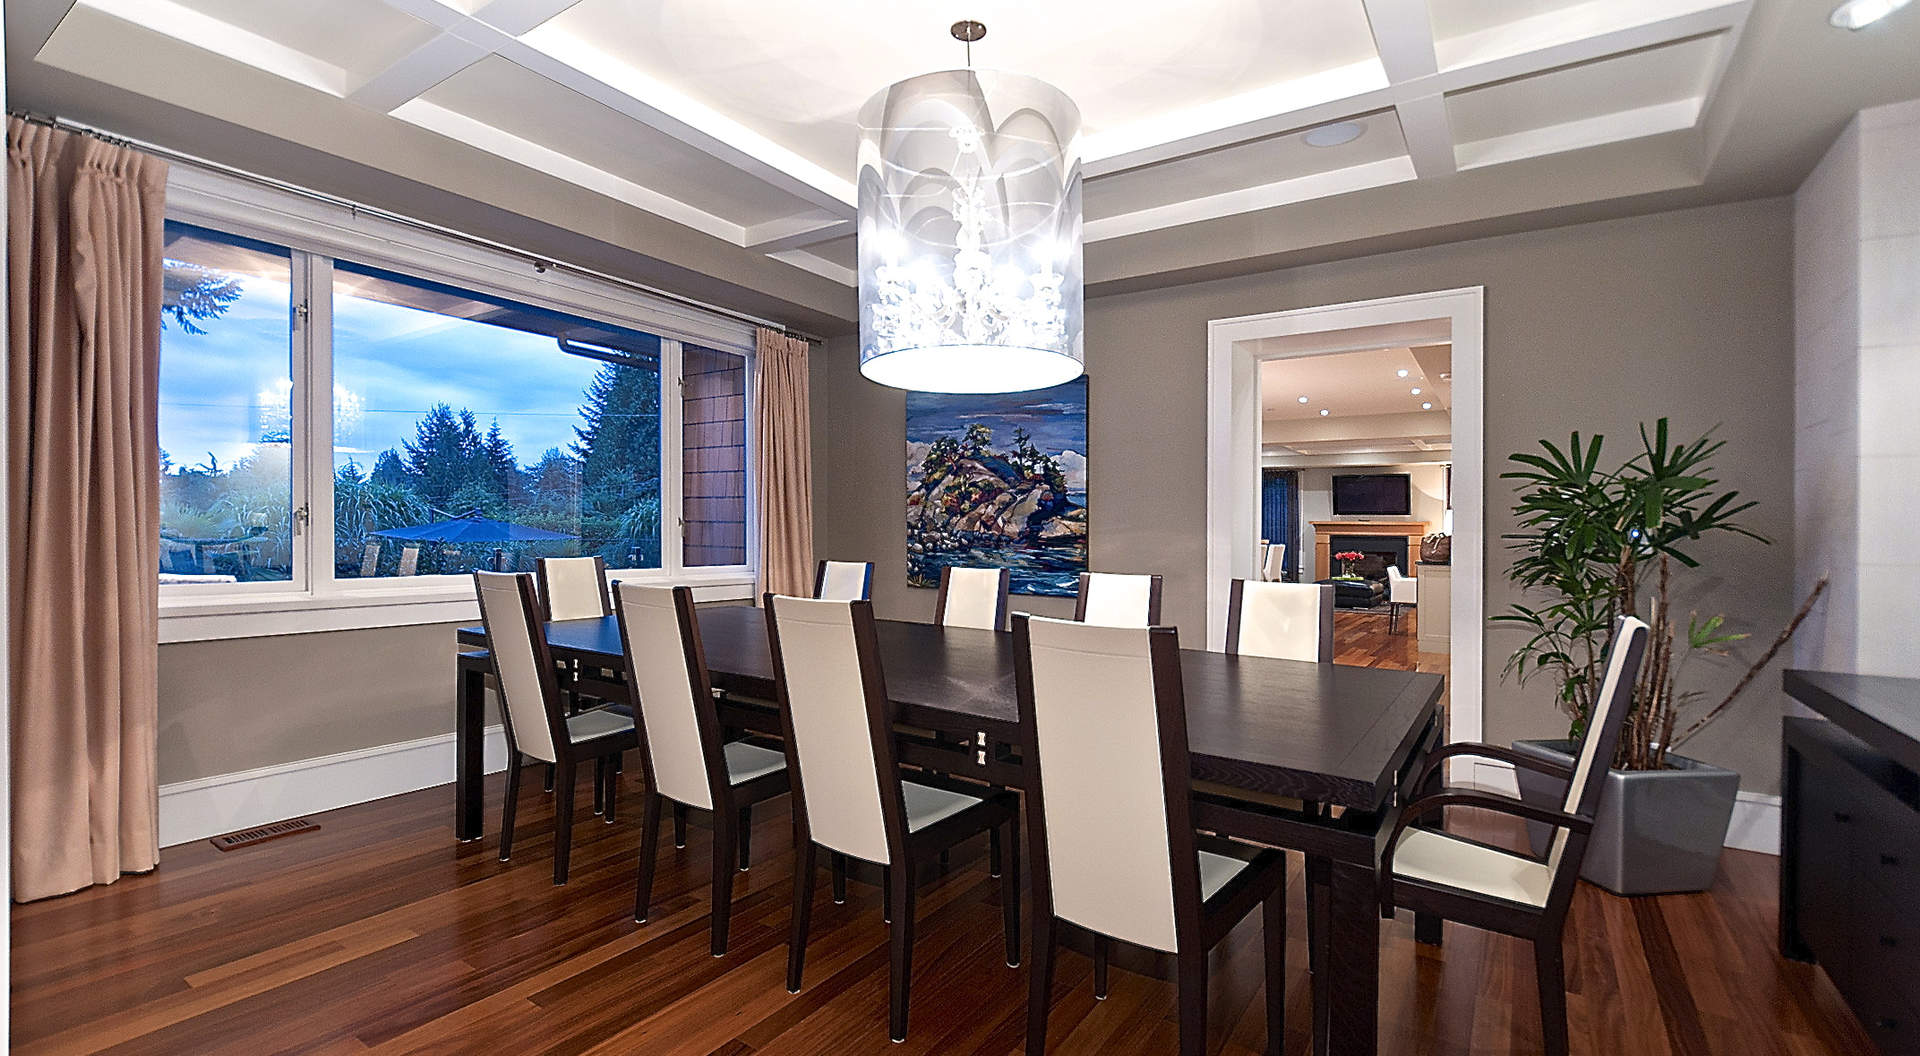 Large Formal Dining Area